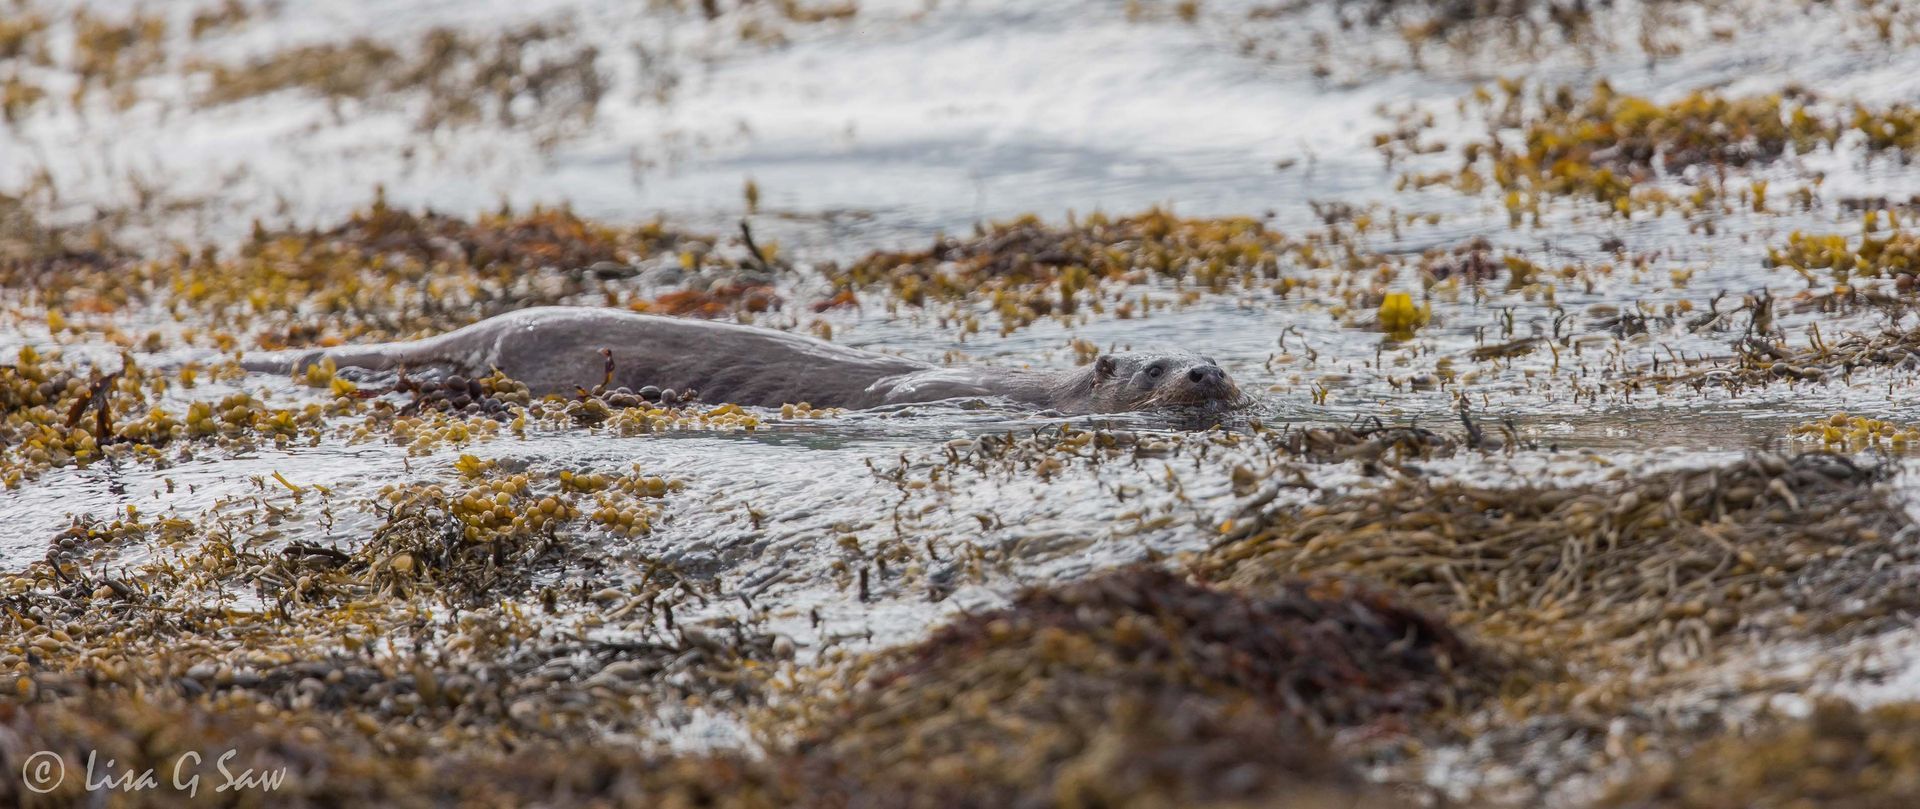 River Otter swimming at low tide